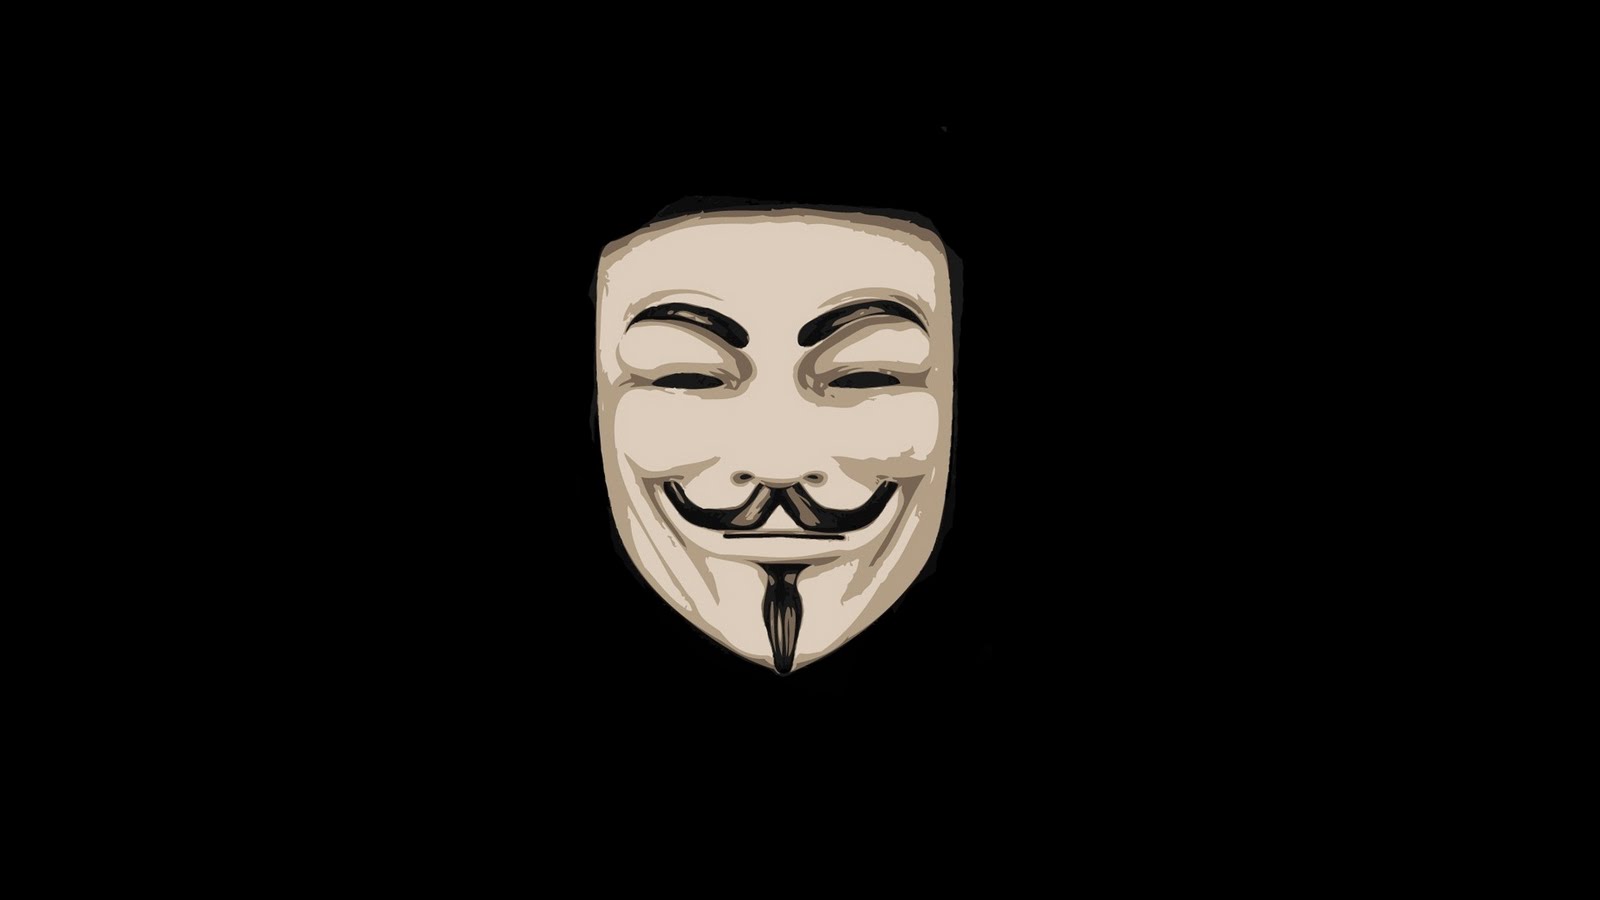 Logos Guy Fawkes Mask HD Wallpapers Download Wallpapers 1600x900